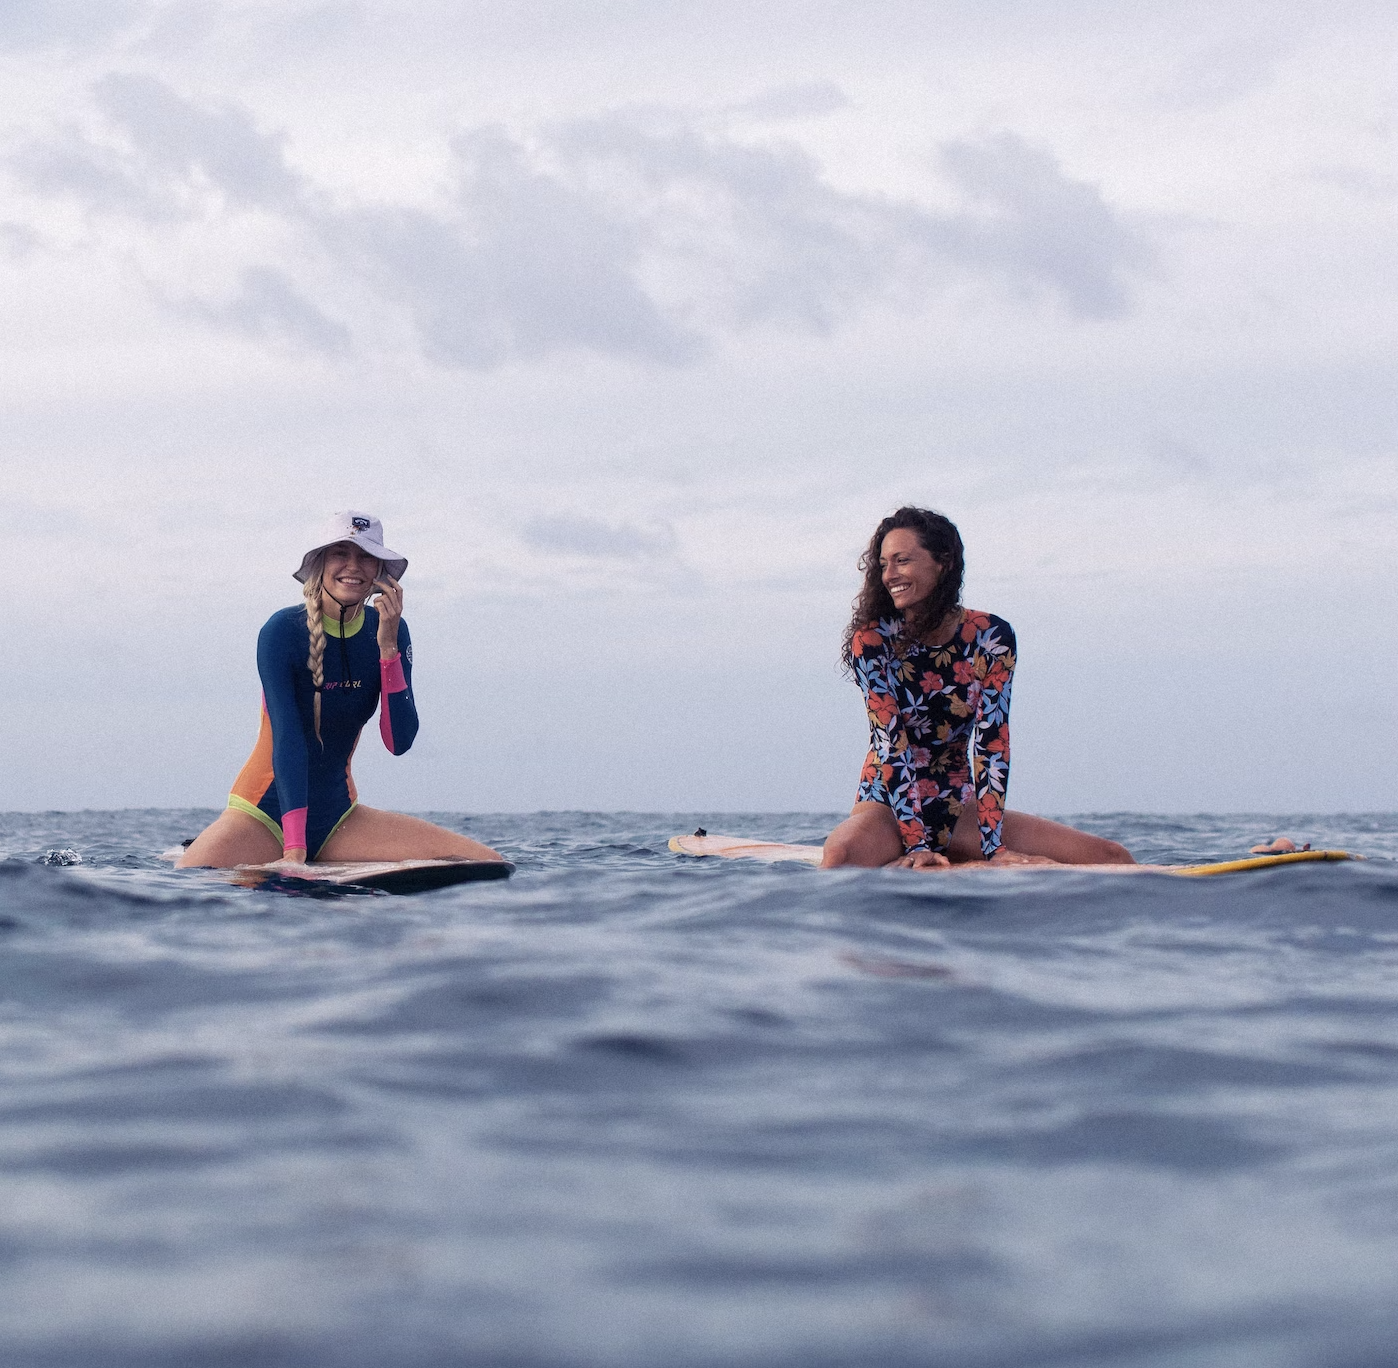 Kunna Haan and Kate surfing in the Maldives with Land of Ride